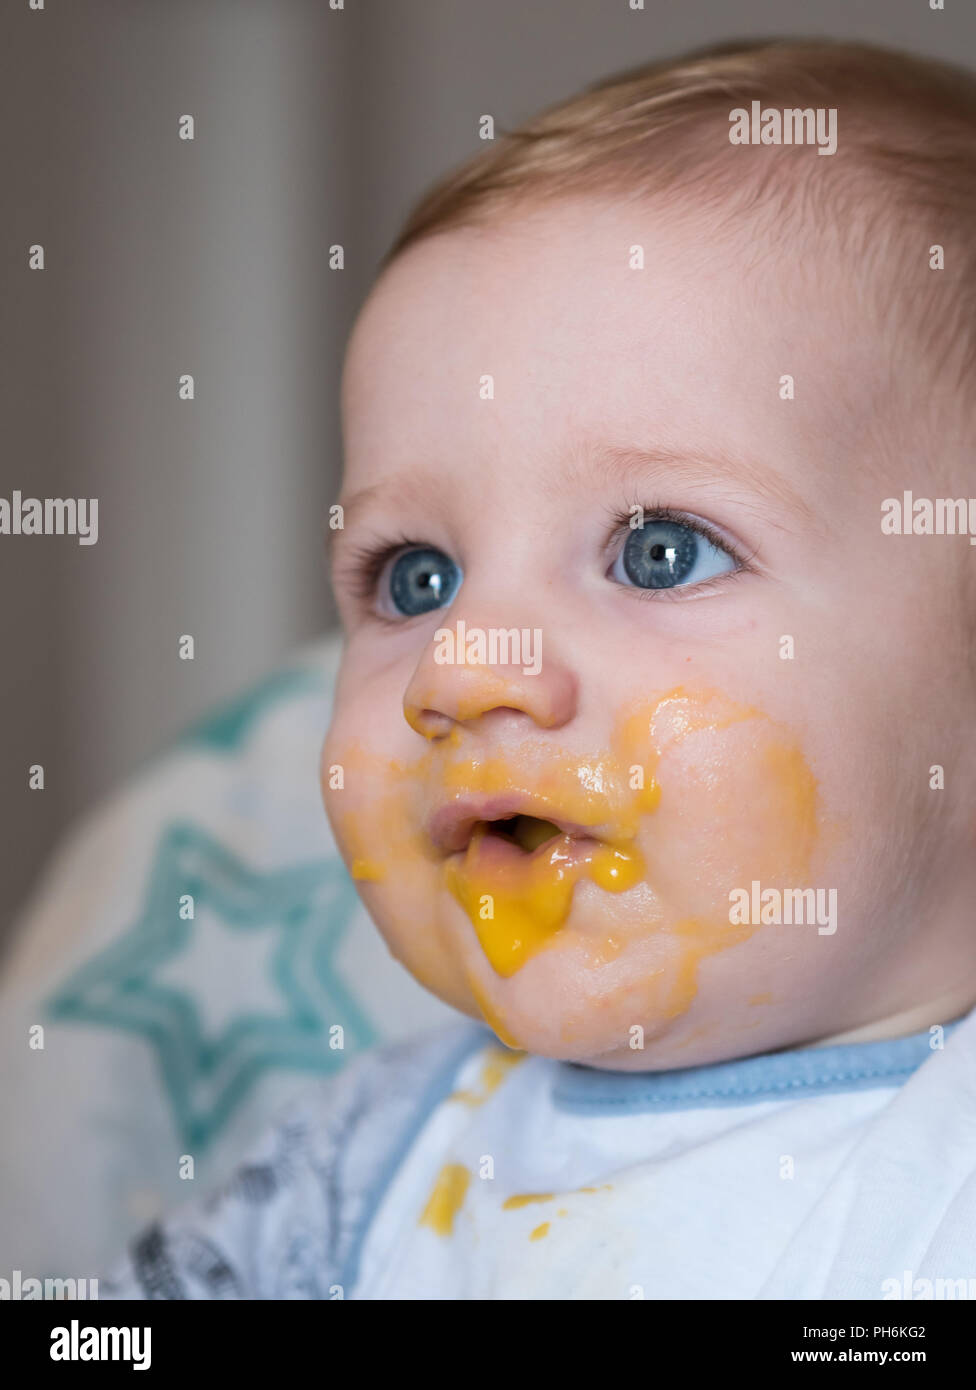 Adorable messy redhead baby boy with blue eyes close up Stock Photo